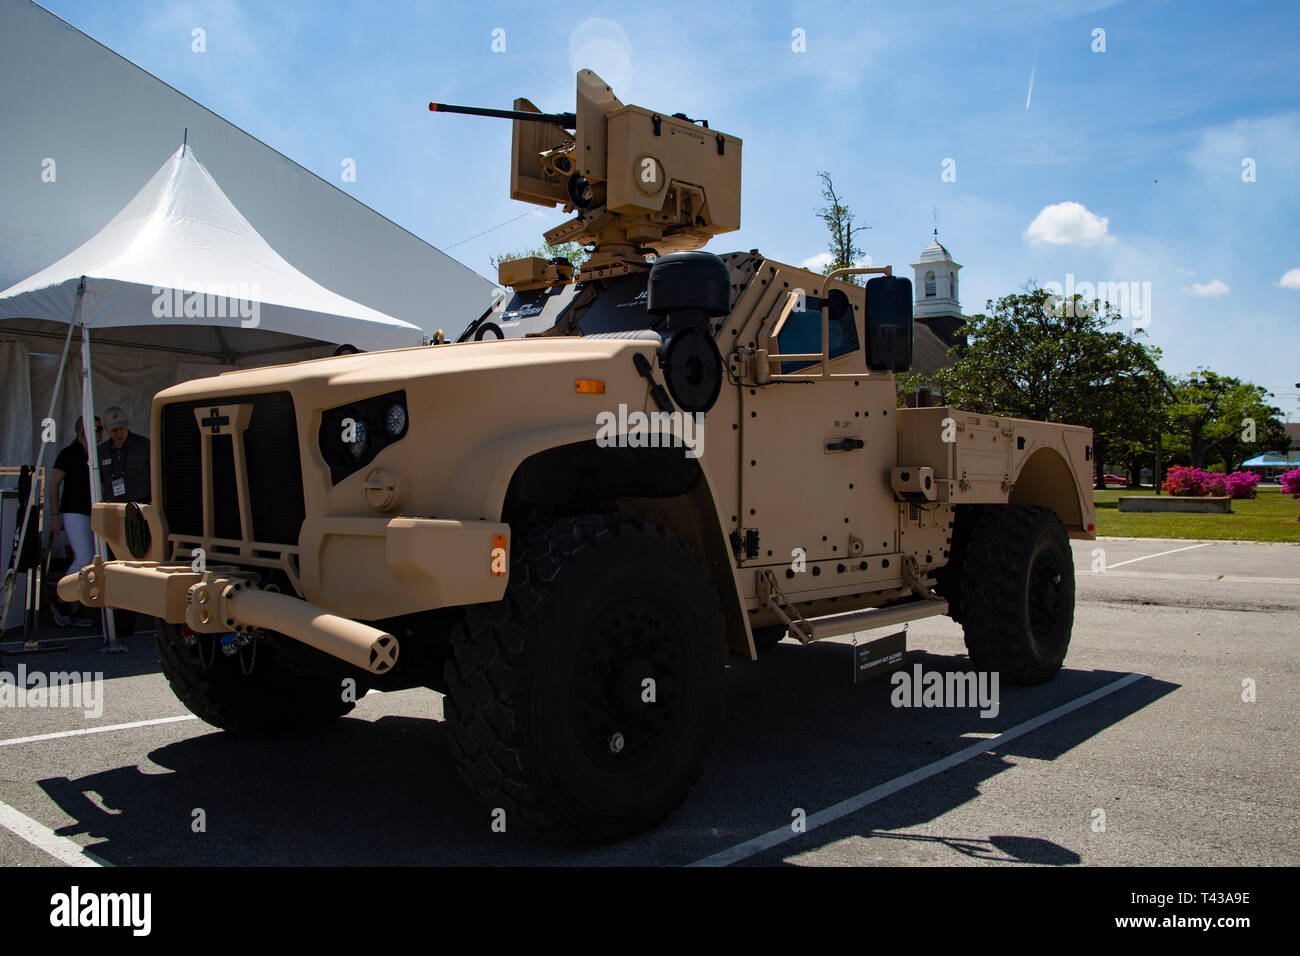 The Joint Light Tactical Vehicle was on display at the Marine South Expo, Camp Lejeune, April 11, 2019. The annual event is a military exposition providing men and women who frequently deploy to the leading edges of today’s military operations with first-hand looks at the latest products from the world’s leading defense equipment manufacturers. Marine South is sponsored by the Marine Corps League, a Marine Corps veterans’ association, and co-sponsored by MCB Camp Lejeune. (U.S. Marine Corps photo by Cpl. Nicholas Lubchenko) Stock Photo